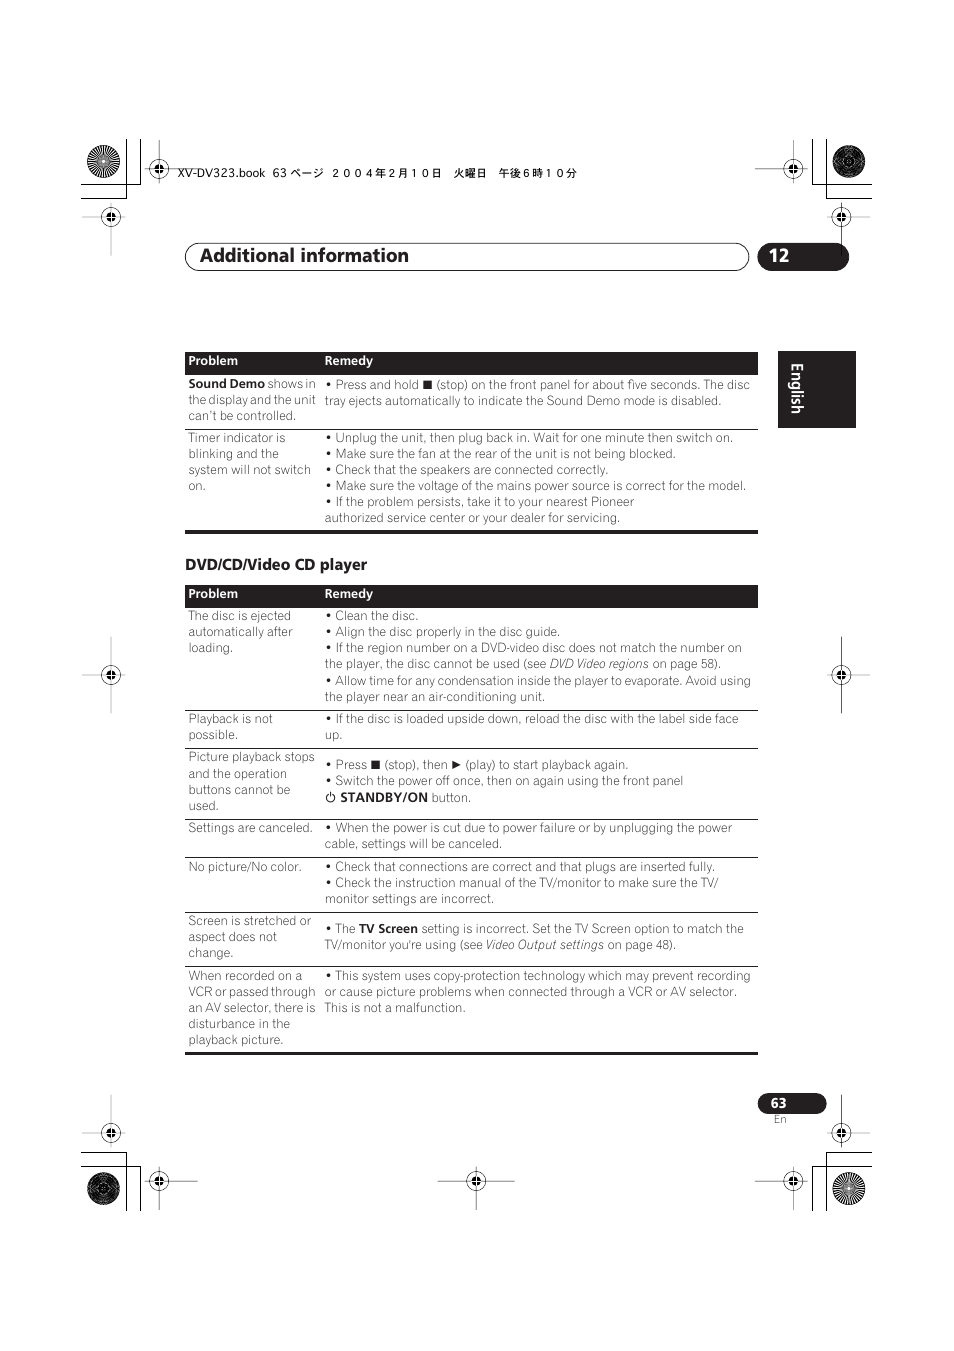 Dvd/cd/video cd player, Additional information 12 | Pioneer S-DV440 User Manual | Page 63 / 74